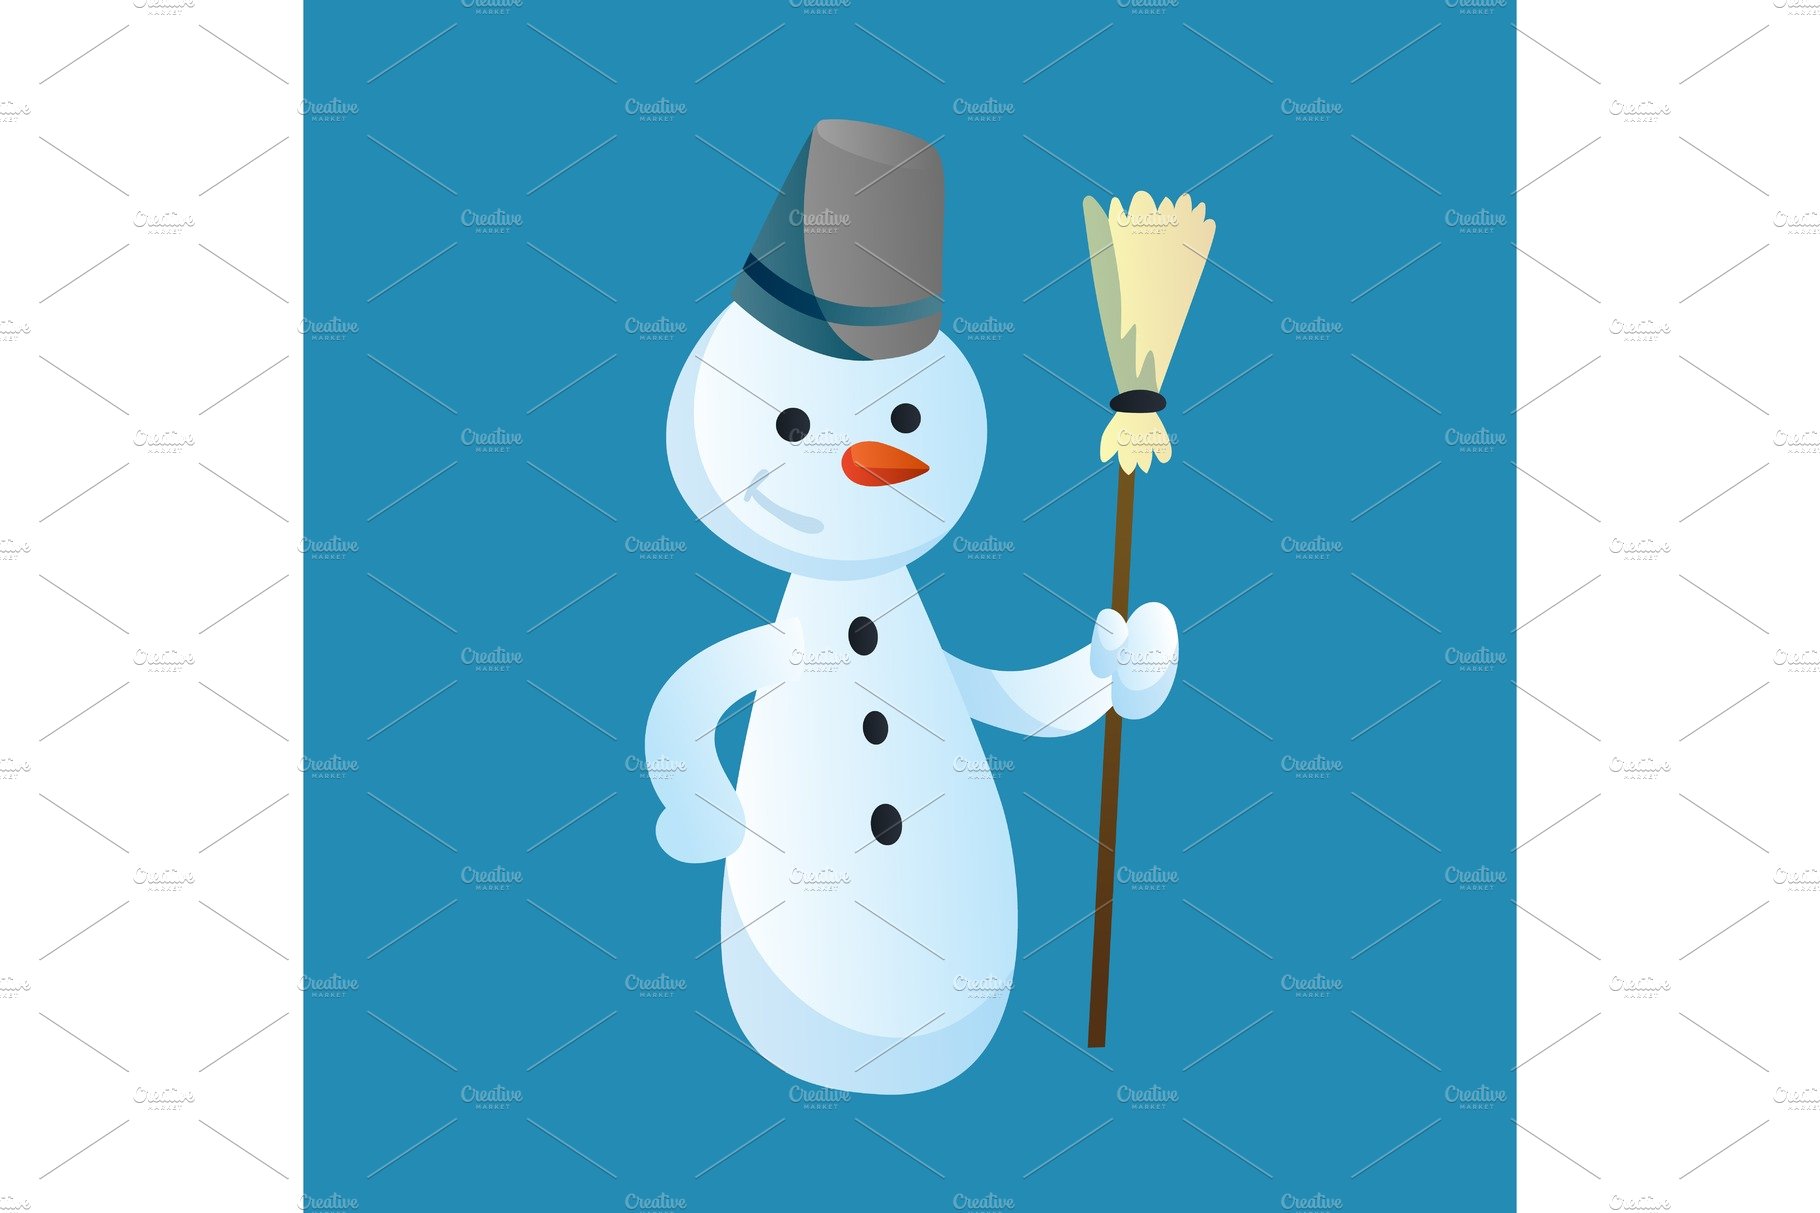 Snowman holds a broom in his hand cover image.